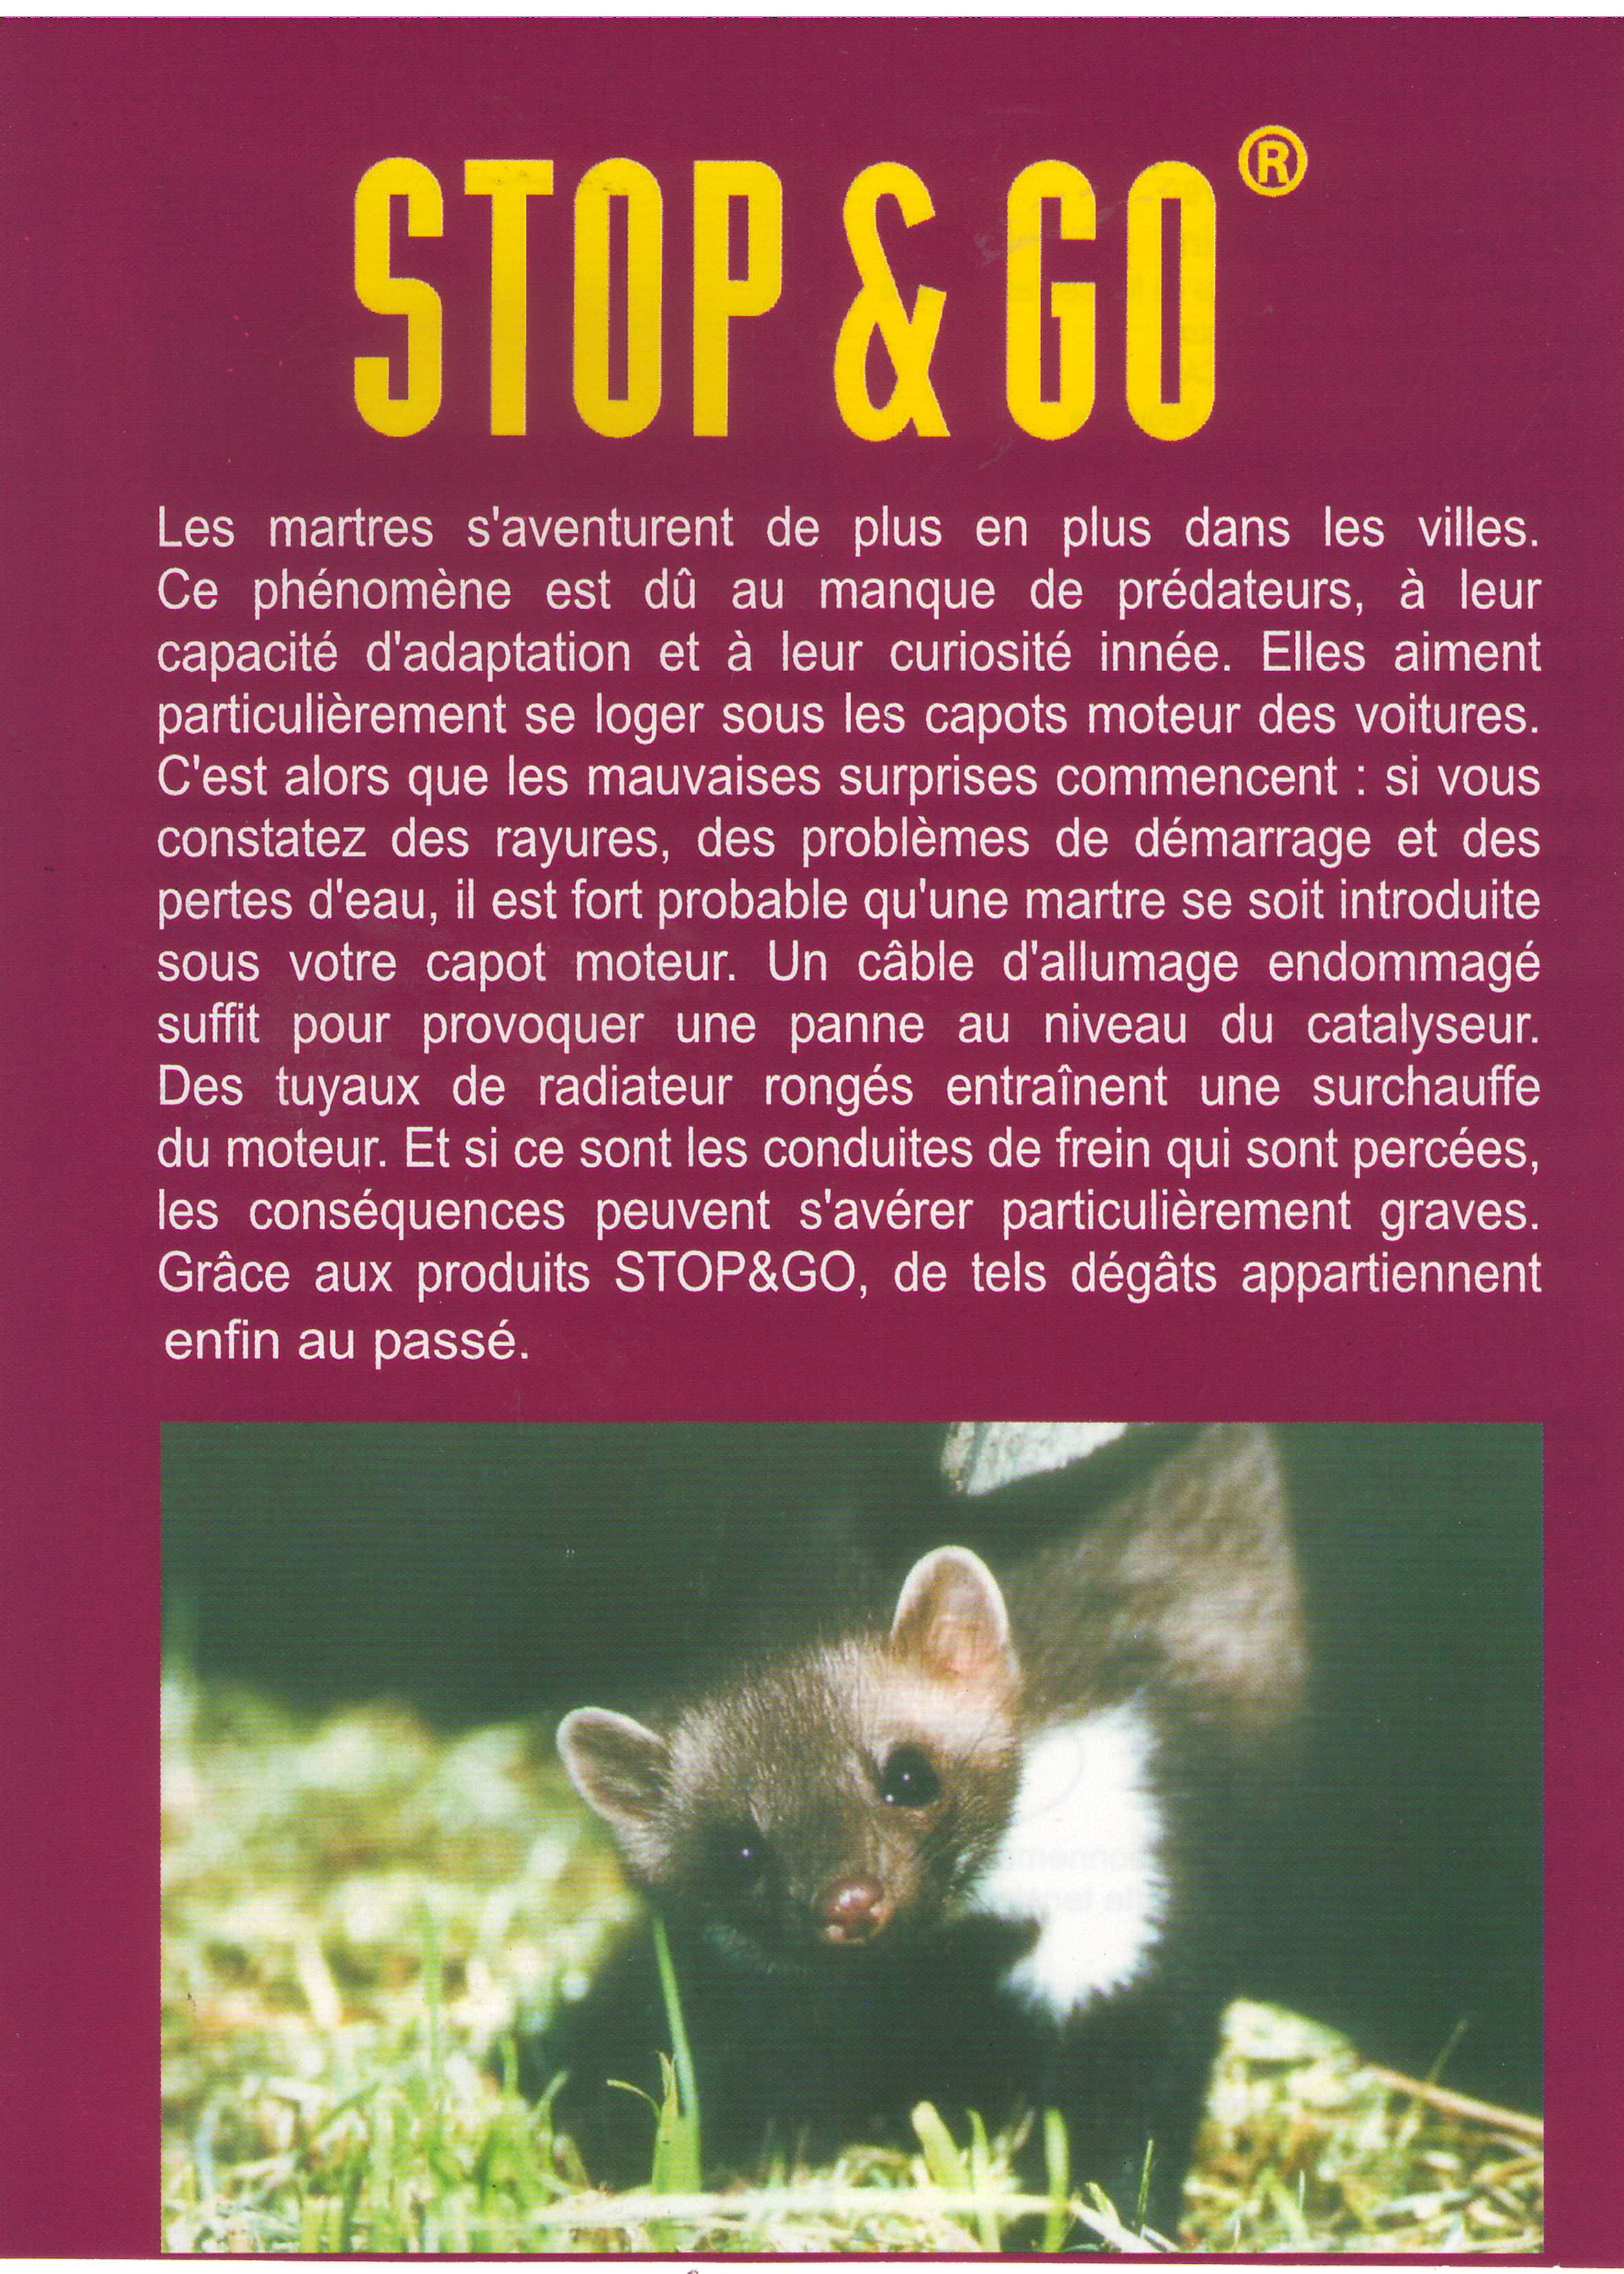 Stop&Go, les protections anti-fouines